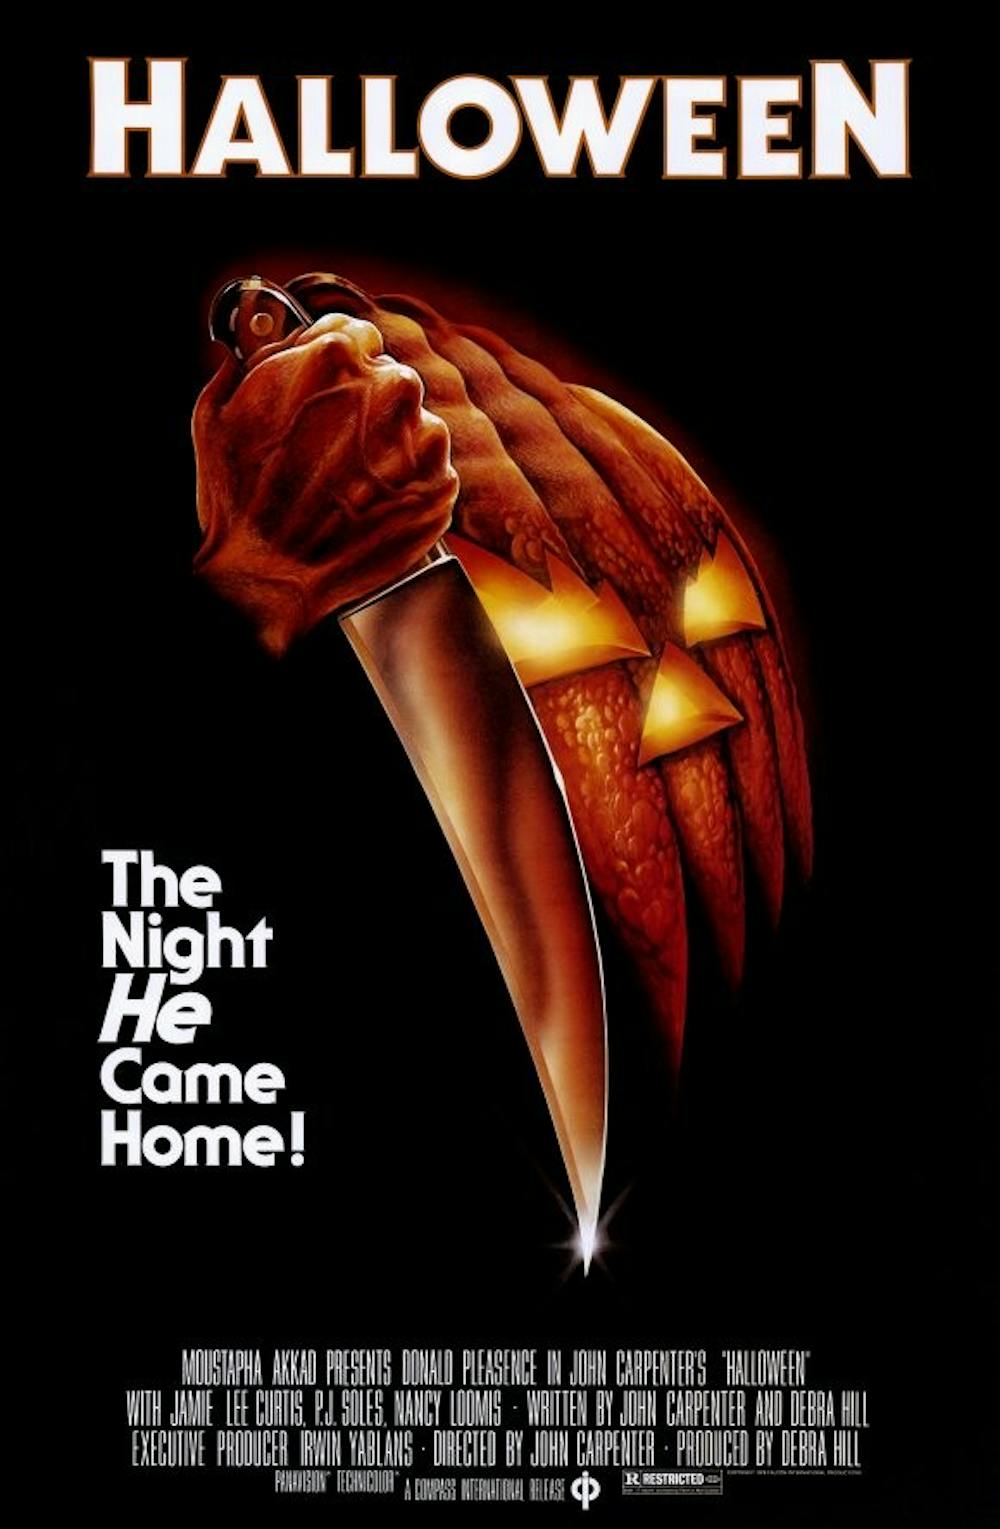 <p>Halloween is the perfect holiday to binge watch all of the best horror films&mdash;like the 1978 classic, "Halloween."</p>